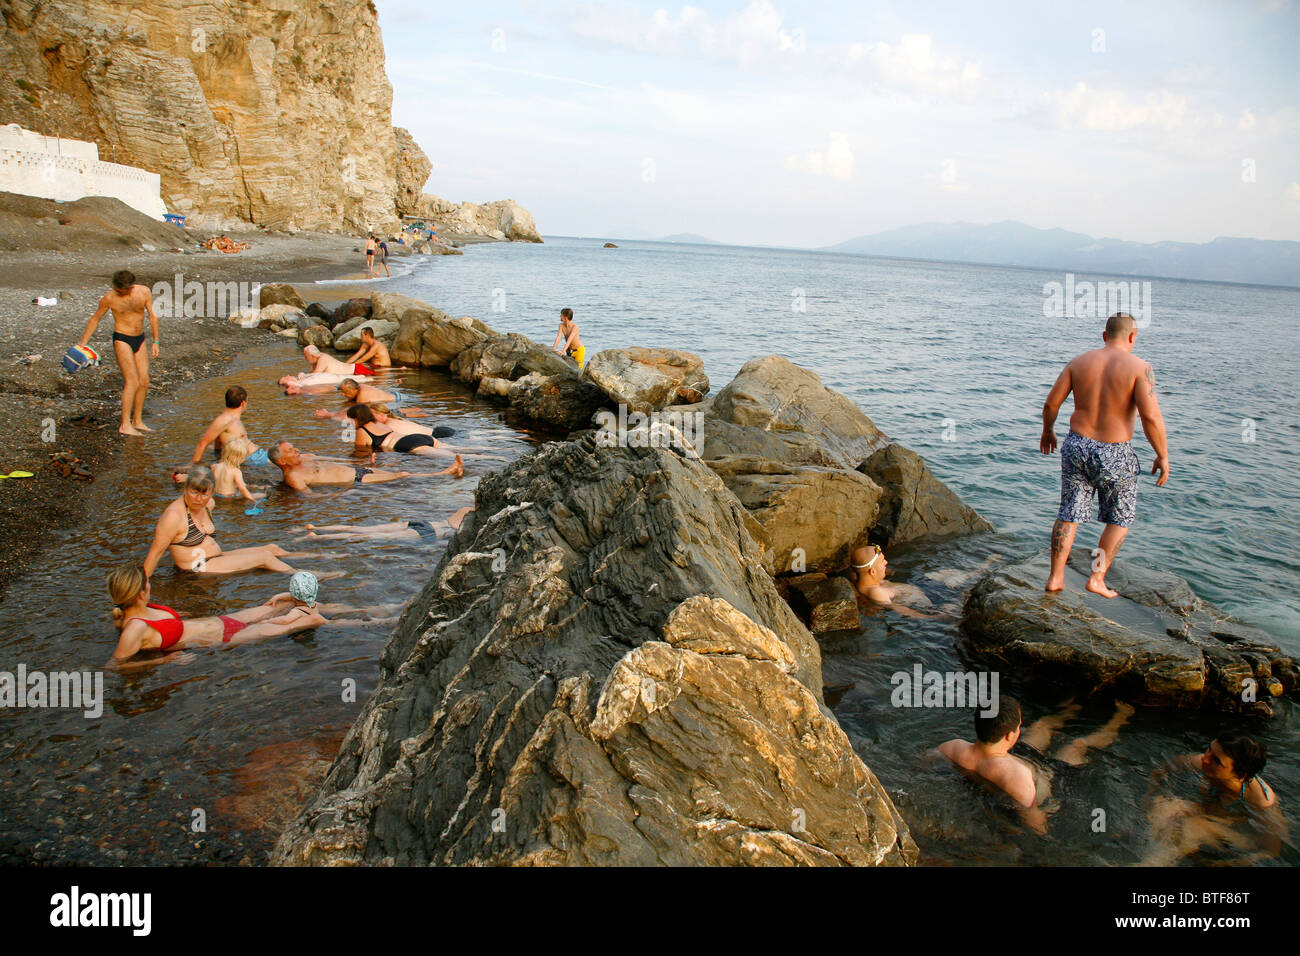 Embros Therme hot springs also known as Therma Loutra, Kos, Greece. Stock Photo